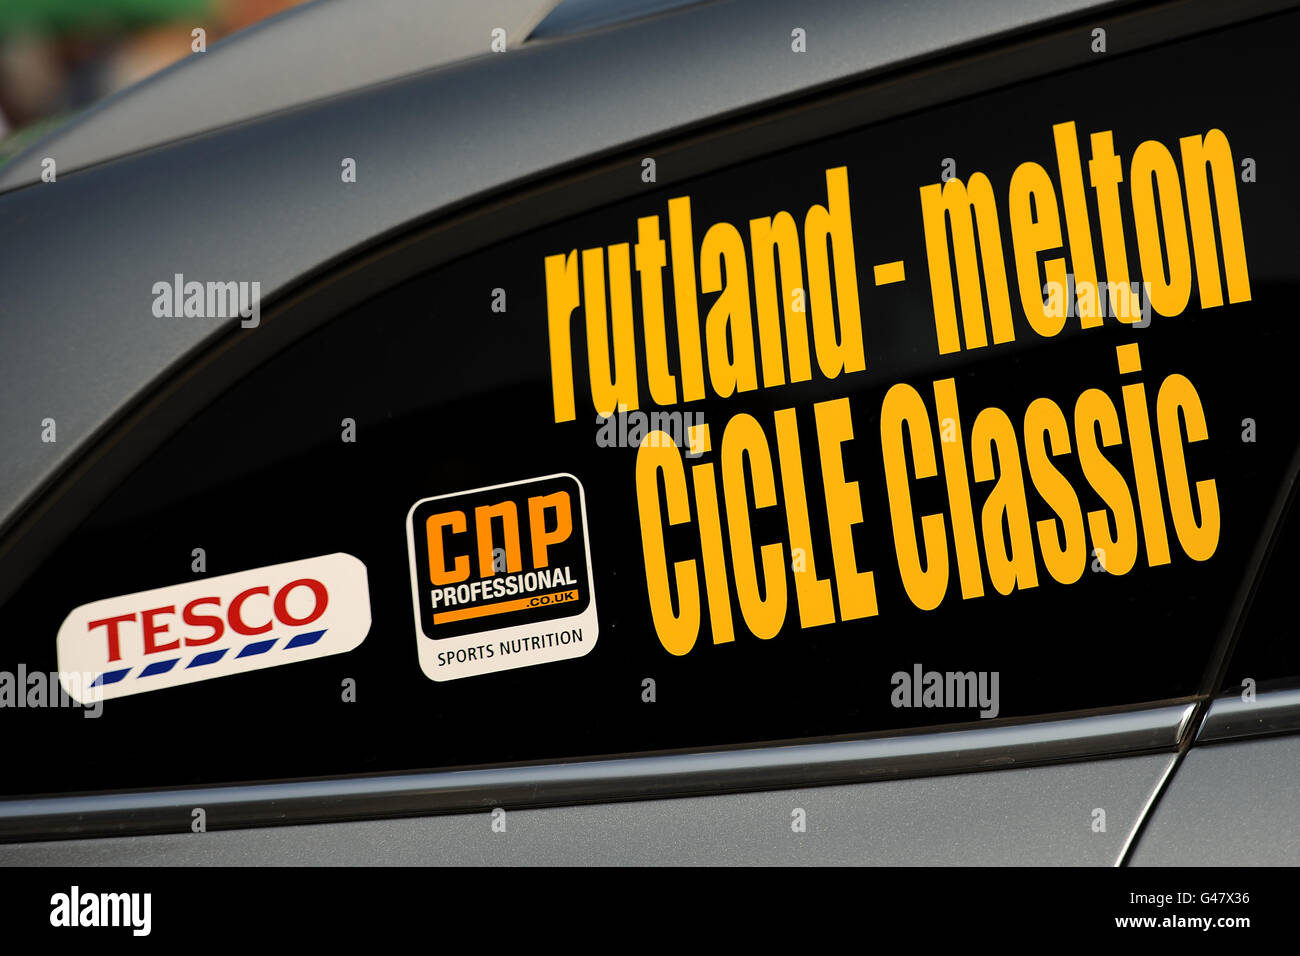 Cycling - Tesco Rutland - Melton International CiCLE Classic. Detailed view of signage for Tesco and CNP Professional on the side of a CiCLE Classic official car Stock Photo